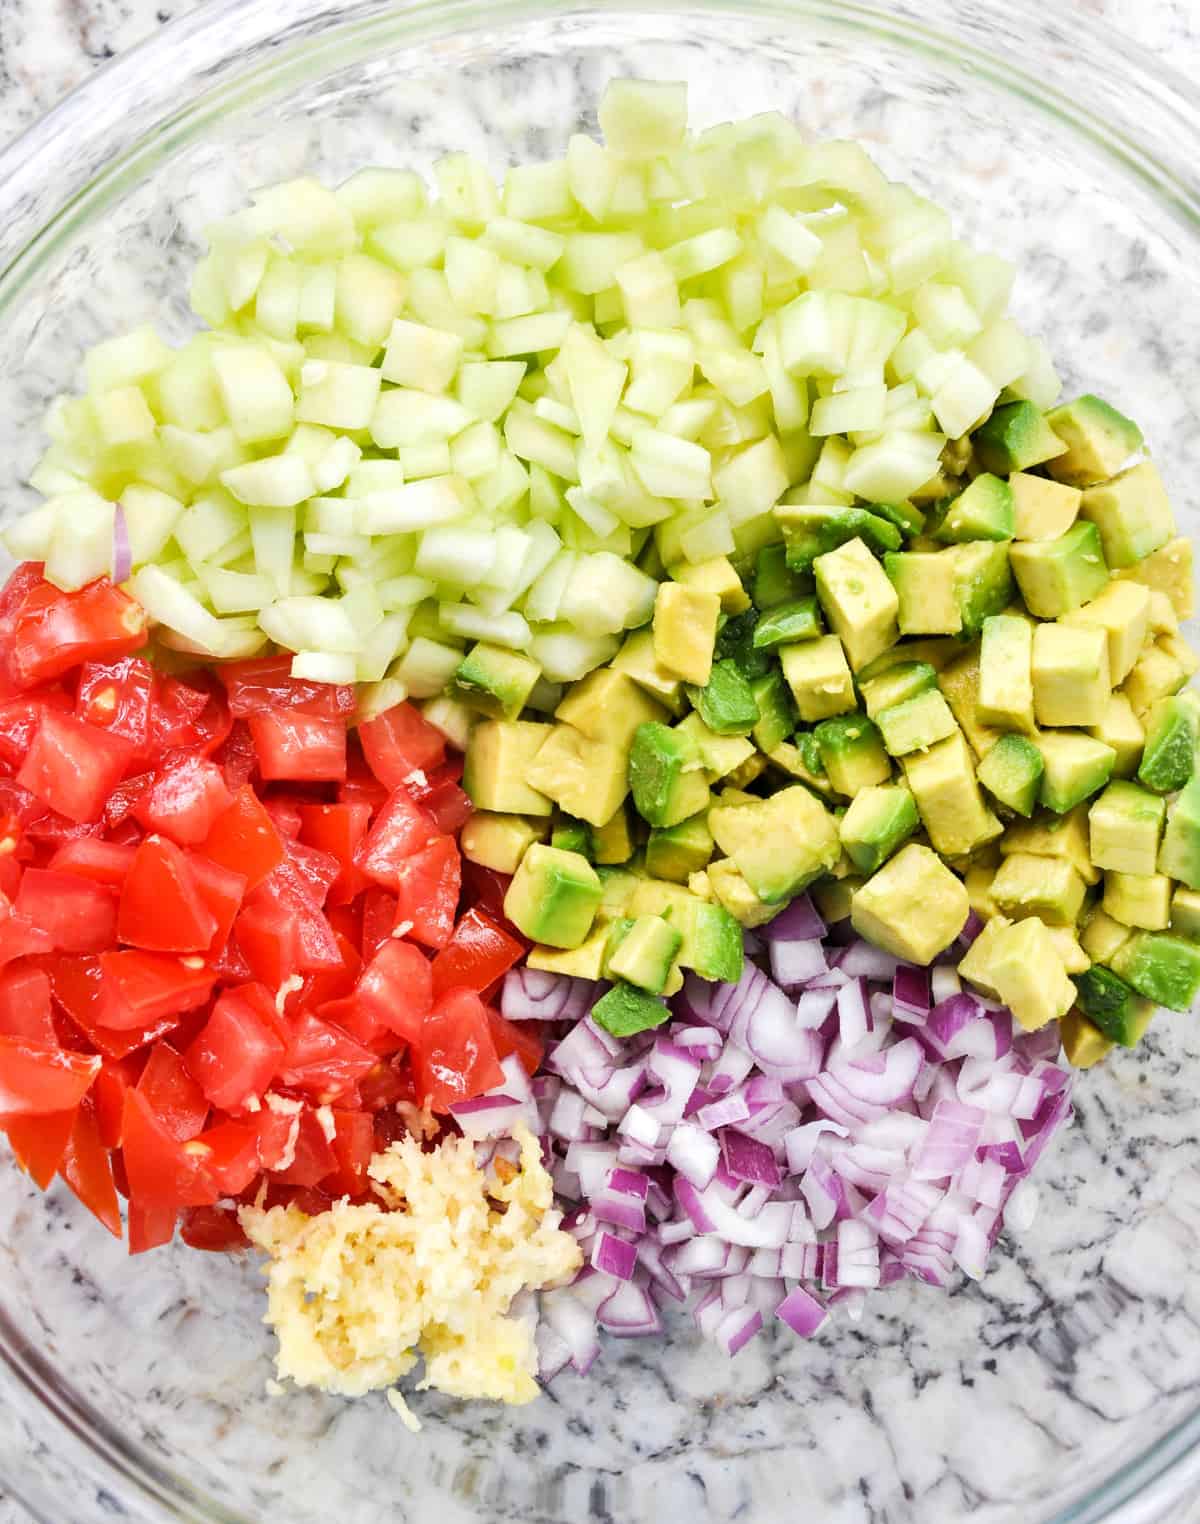 Ingredients diced up: cucumber, tomato, red onion, garlic and avocado